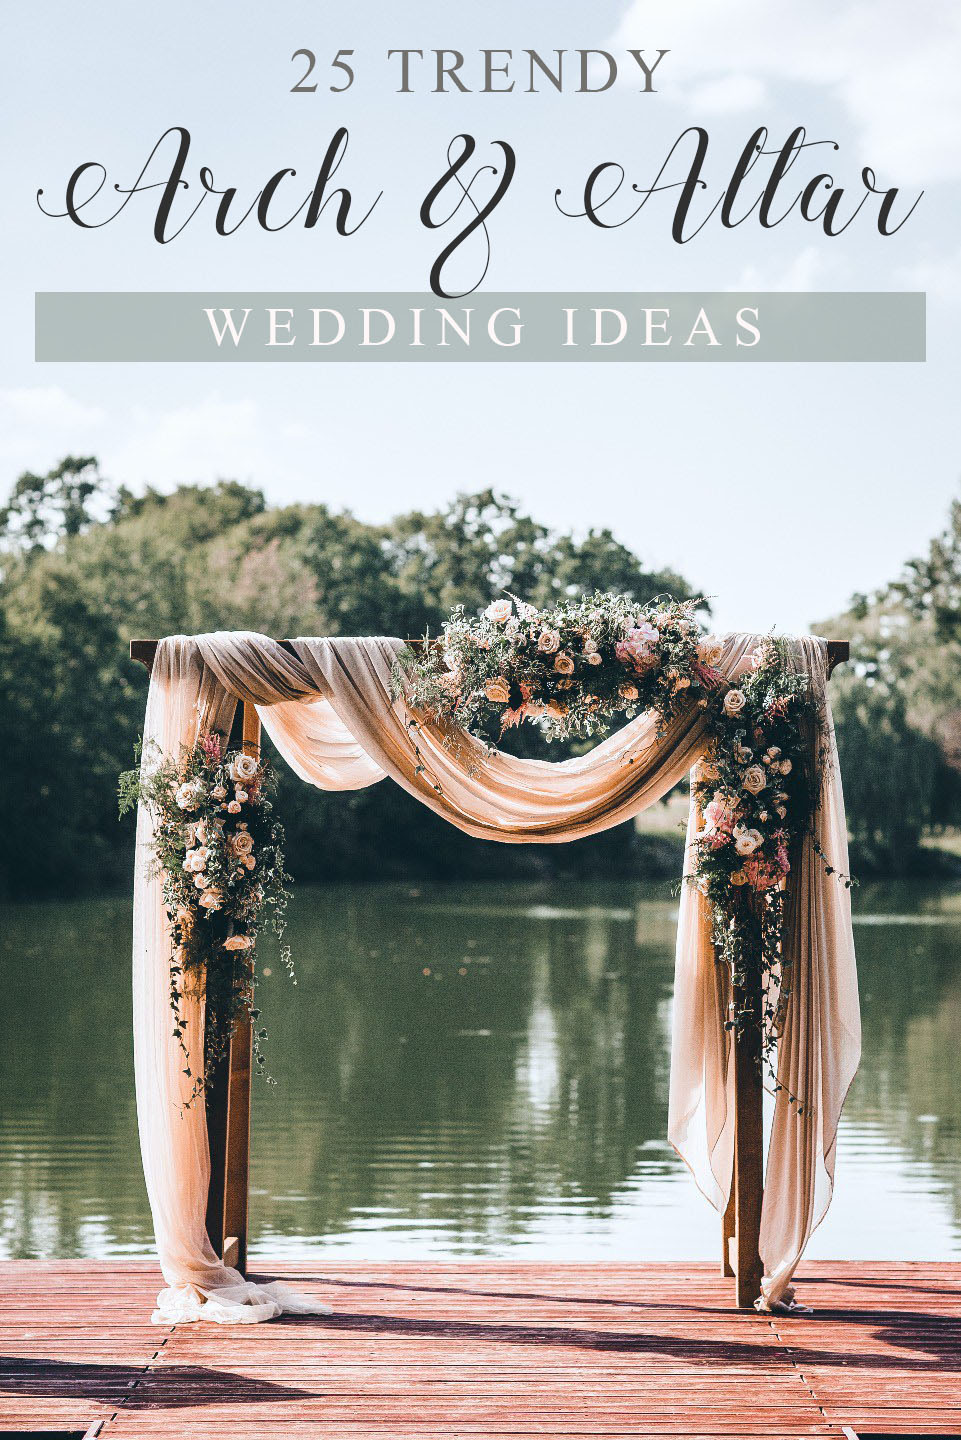 How To Decorate A Arch For Wedding Trendy Wedding Altar And Arch Ideas For 2018 how to decorate a arch for wedding|guidedecor.com